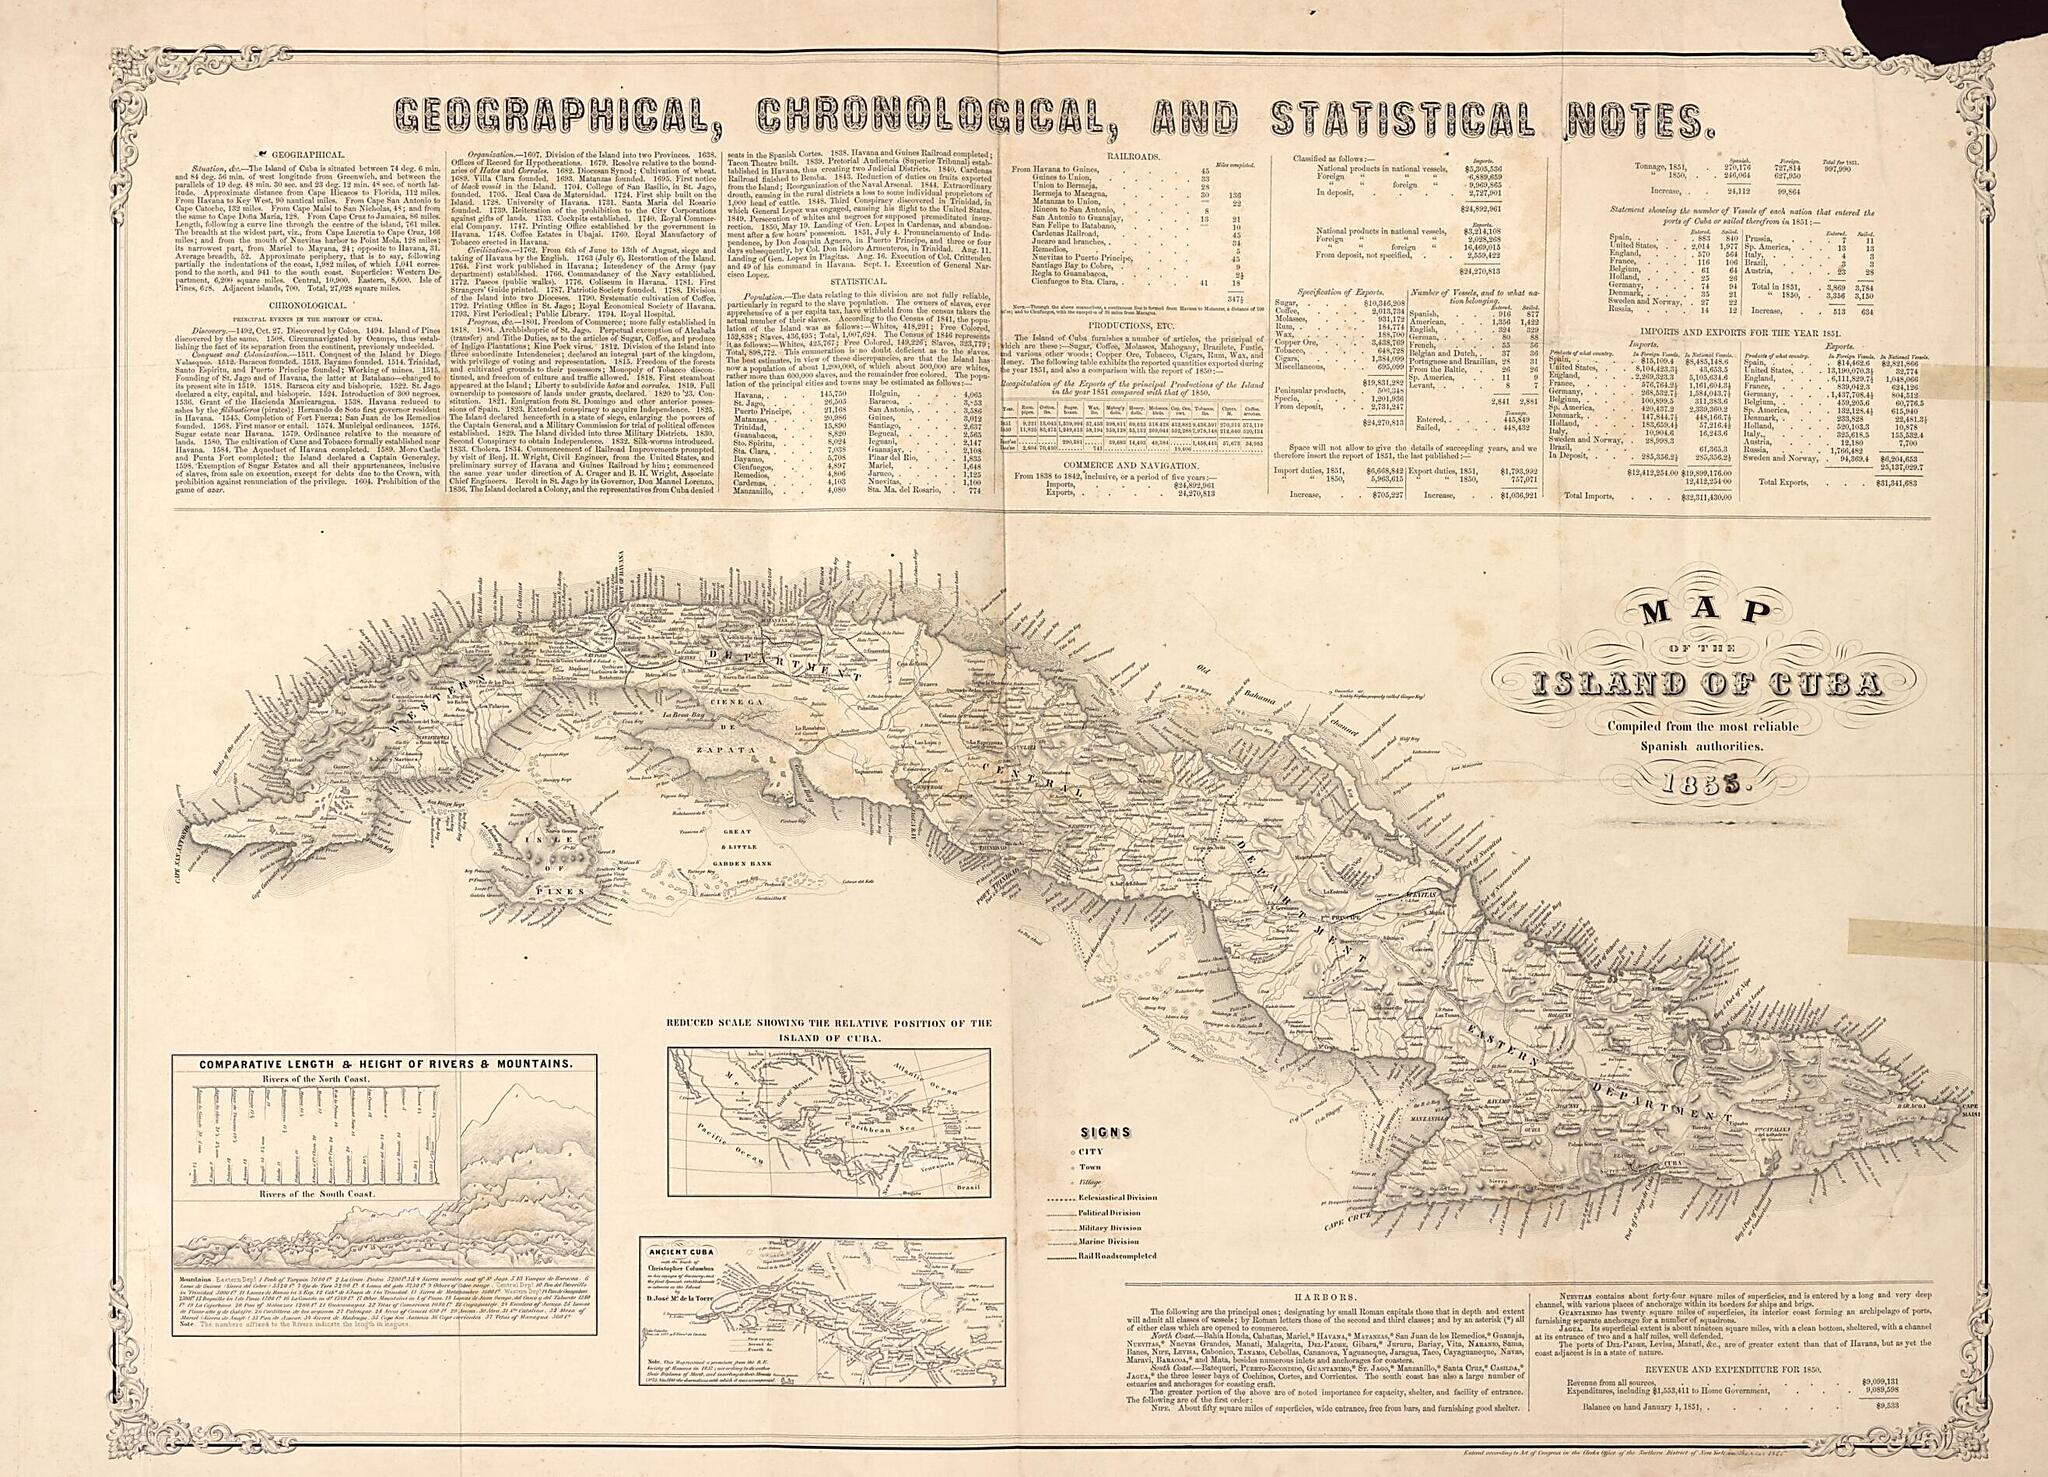 This old map of Map of the Island of Cuba : Compiled from the Most Reliable Spanish Authorities from 1855 was created by  in 1855